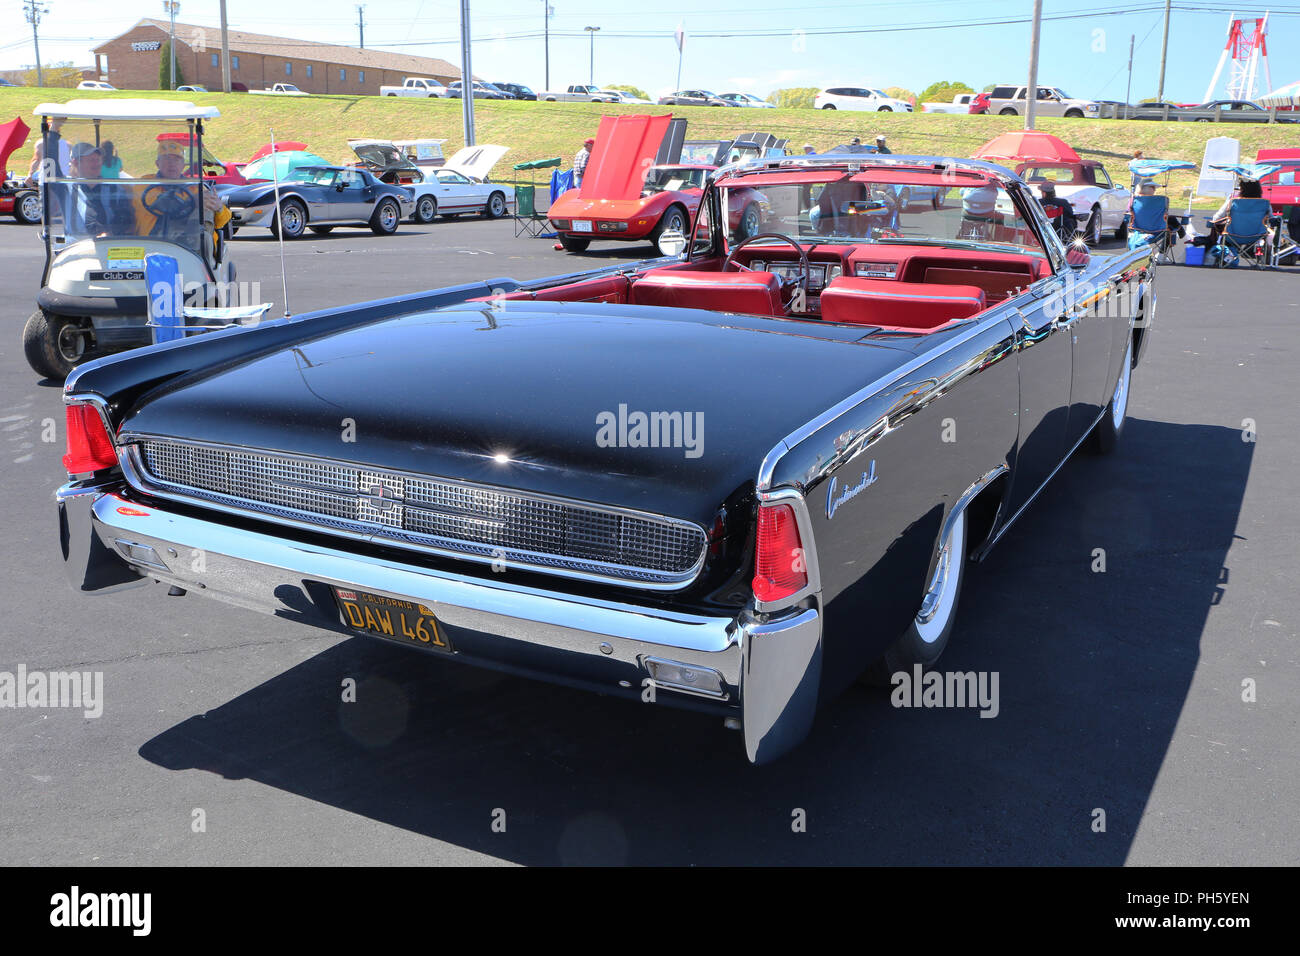 CONCORD, NC - April 8, 2017: 1961 Lincoln Continental automobile on display at the Pennzoil AutoFair classic car show held at Charlotte Motor Speedway. Stock Photo